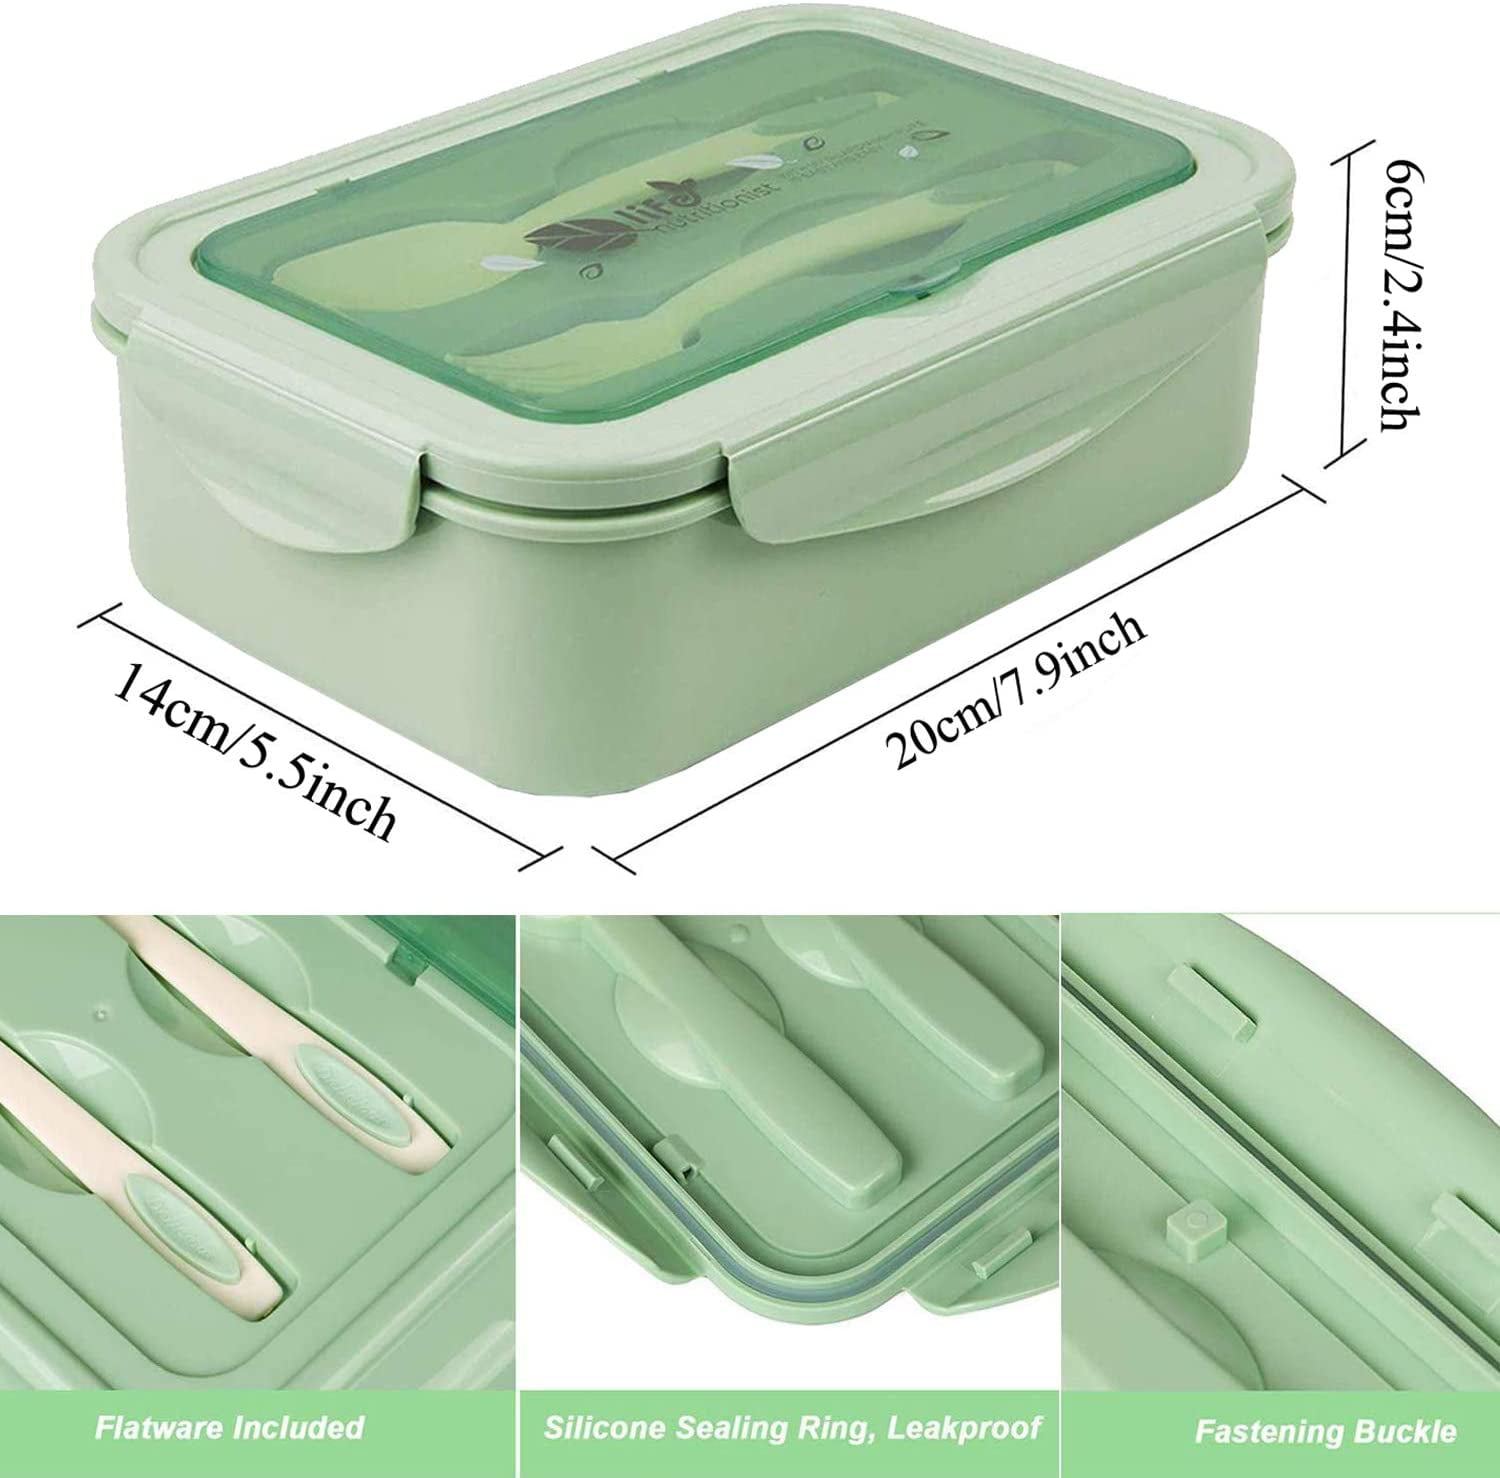 1pc bento or lunch box with seal cover,can be used in microwave,household  refrigerator sealed preservation box,food container